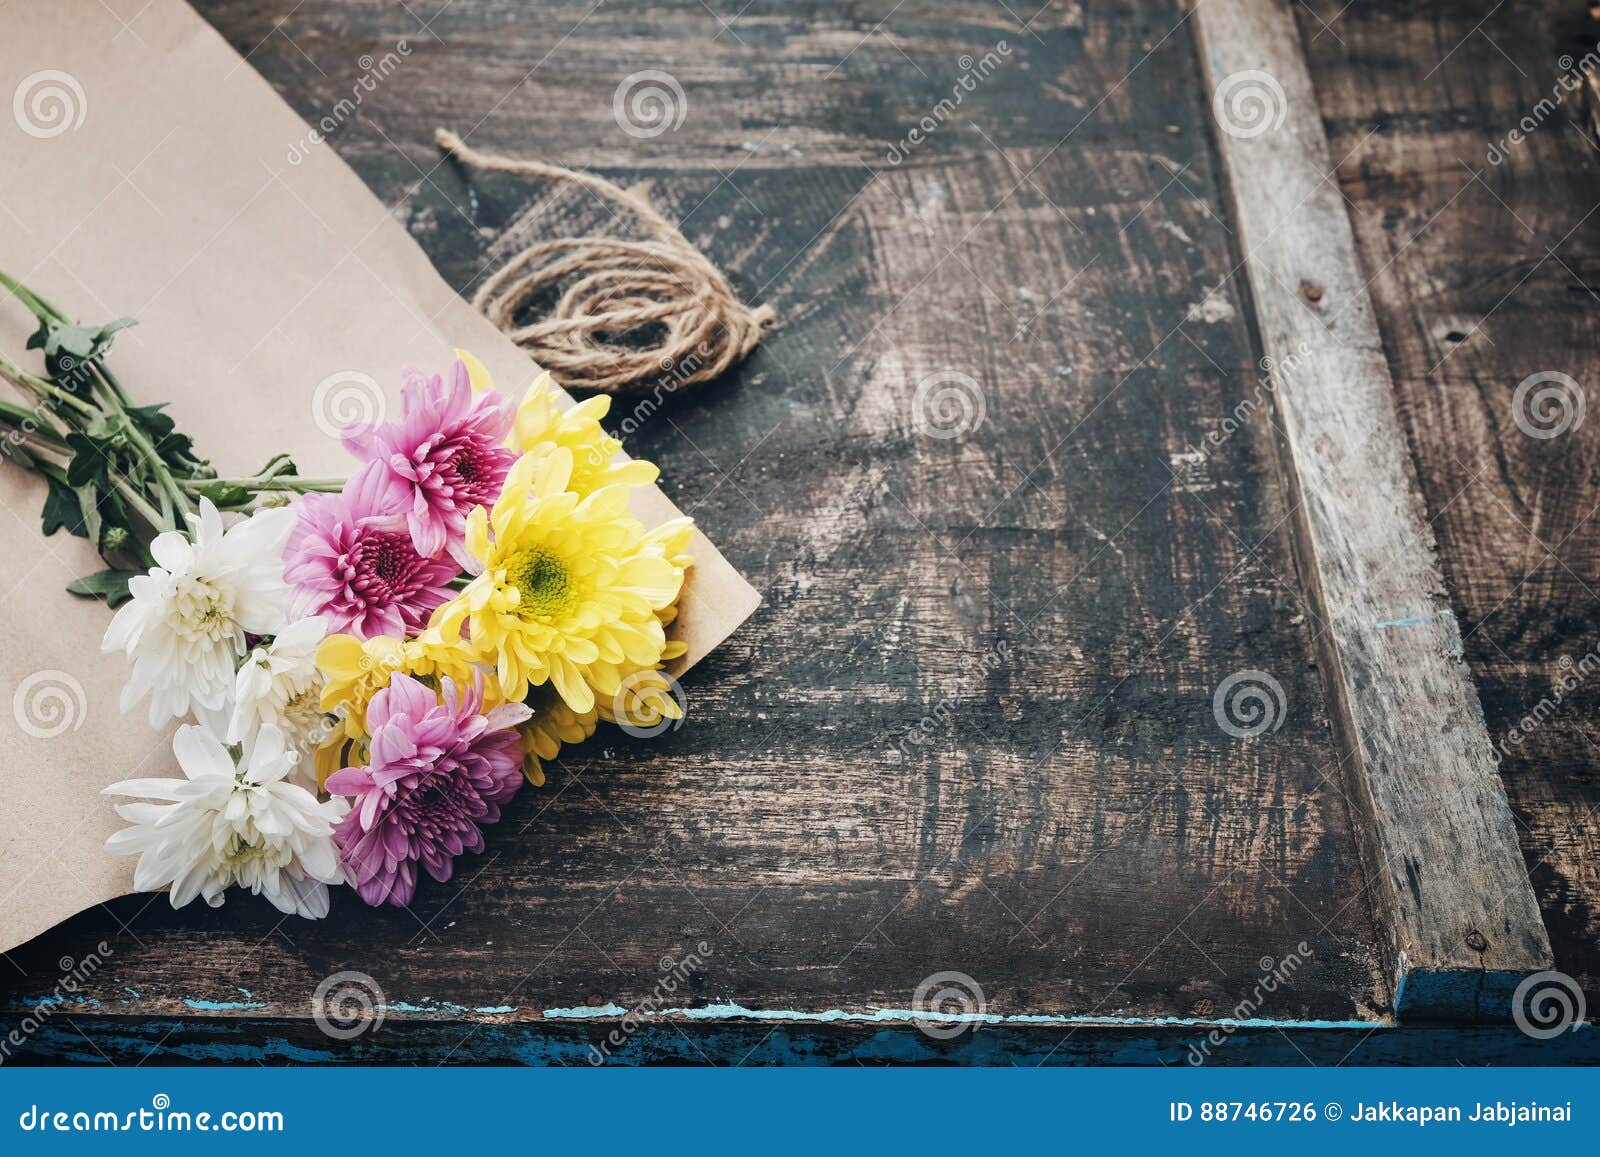 Bouquet Of Beautiful Dry Flowers Wrapped In Brown Paper Isolated